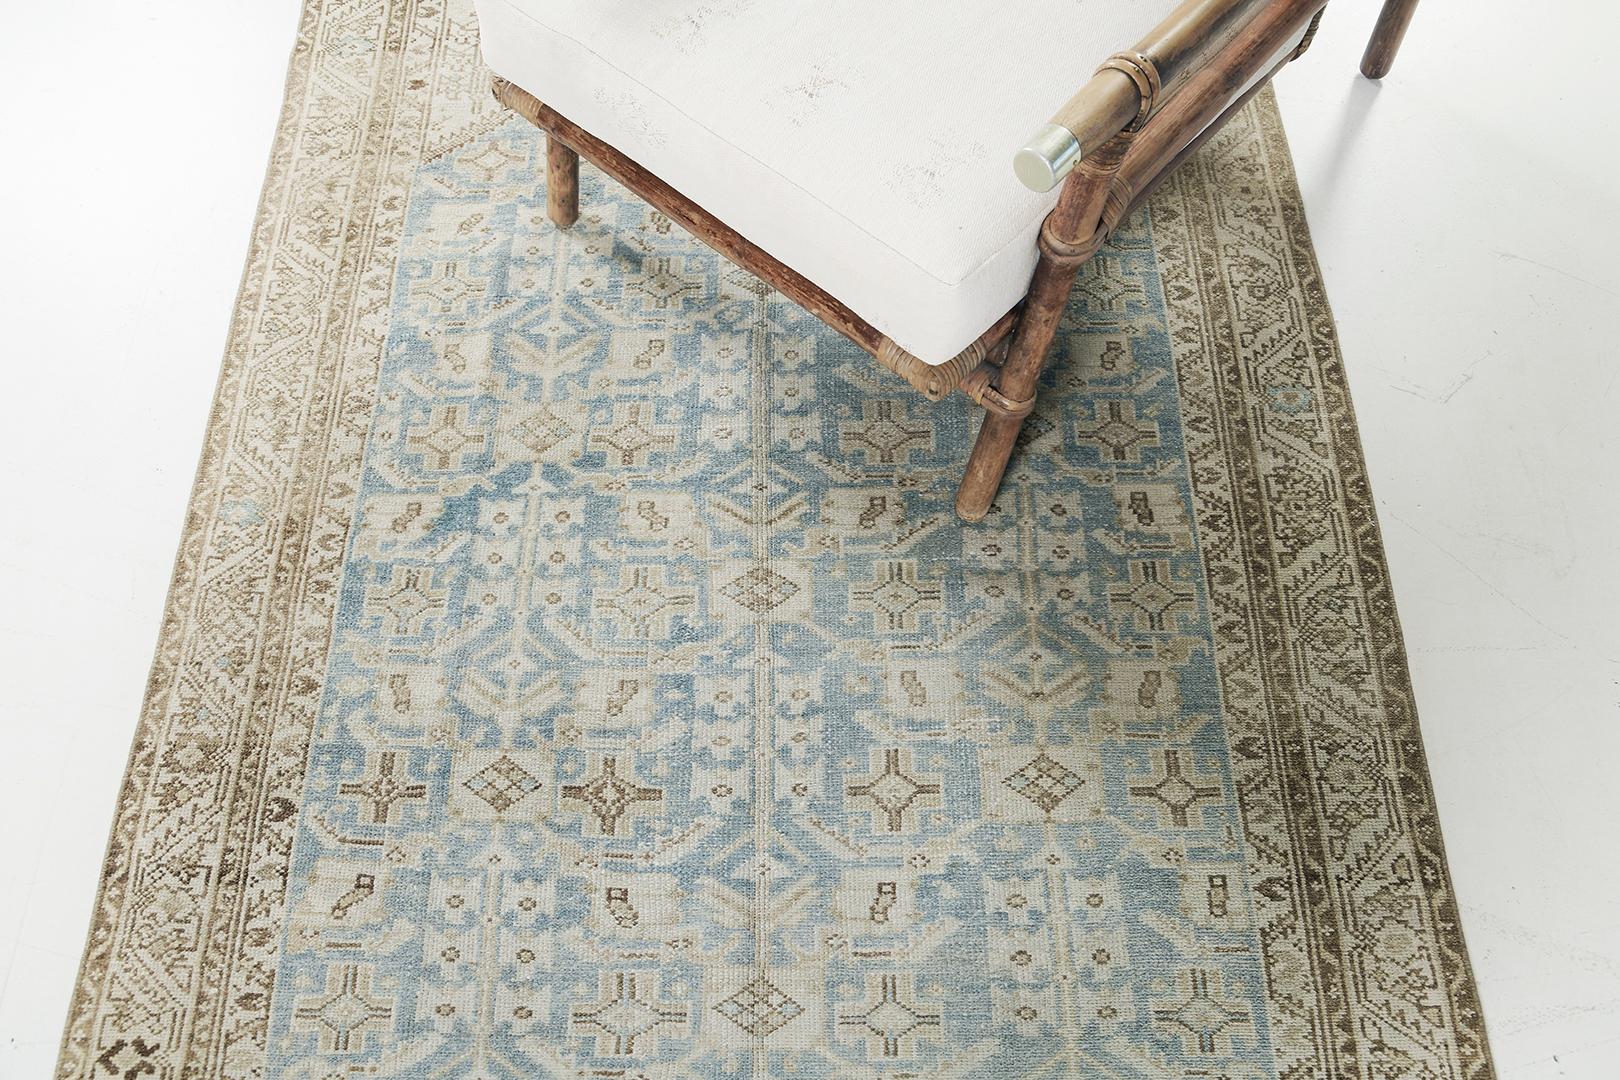 A magnificent Antique Persian Malayer Runner that boasts its alluring design. Featuring its intricate composition of geometric and botanical motifs, this exquisite rug features the cool tones of cerulean blue and ivory. The attention to detail and